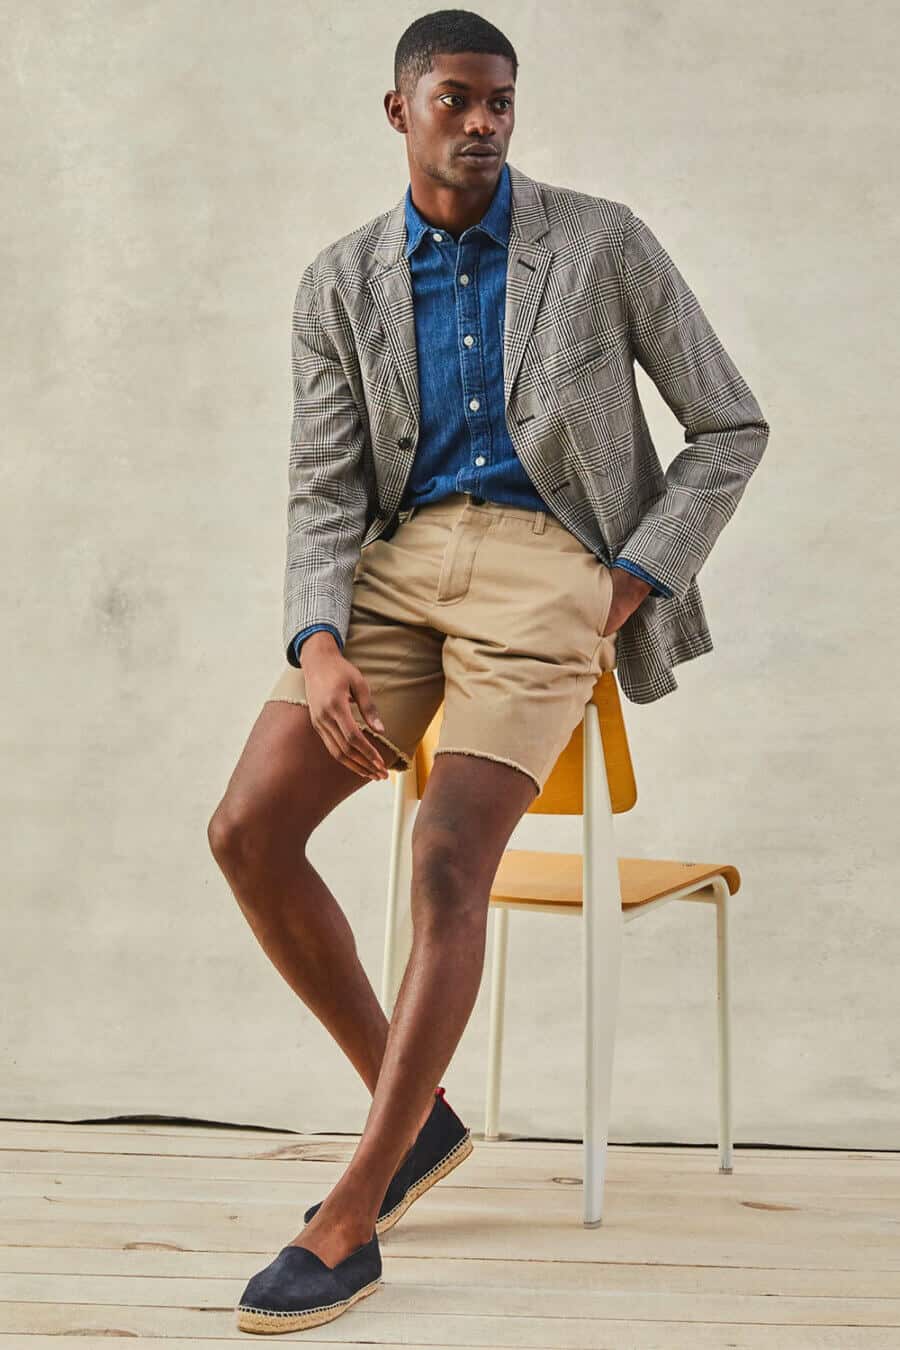 Men's cut off shorts with an Oxford shirt and blazer outfit